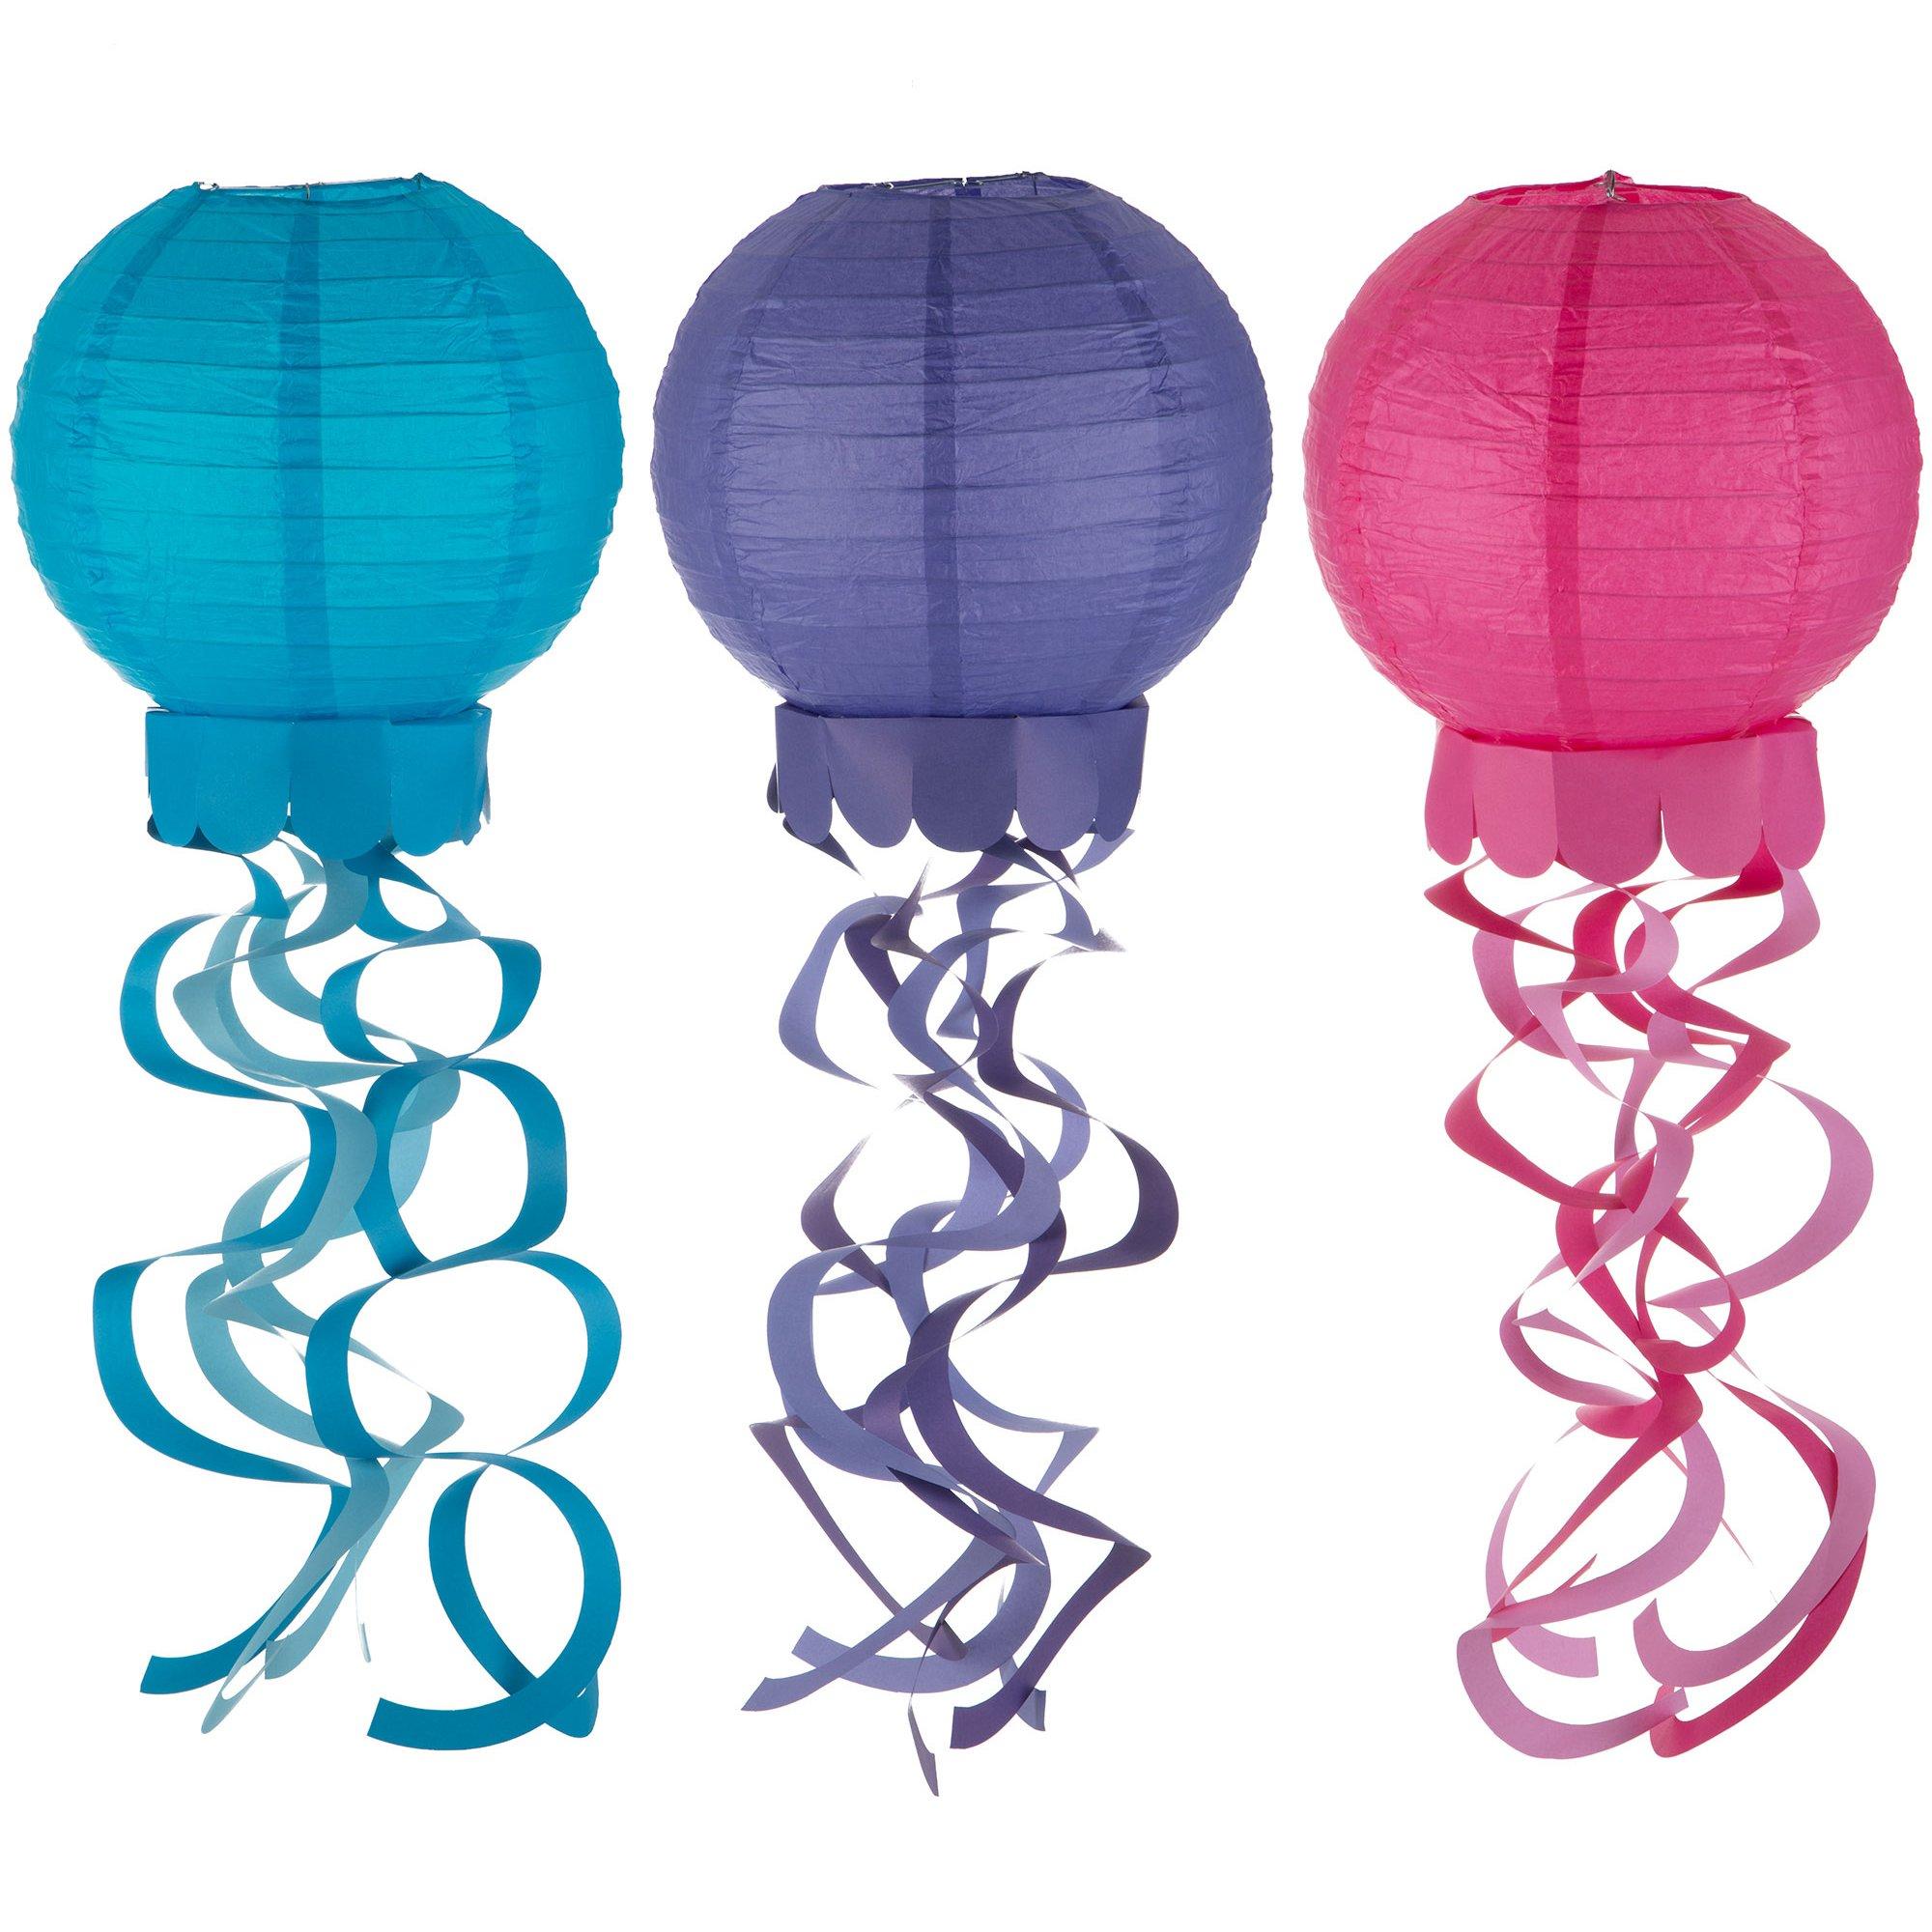 I designed the model for these Jellyfish lanterns and cut them